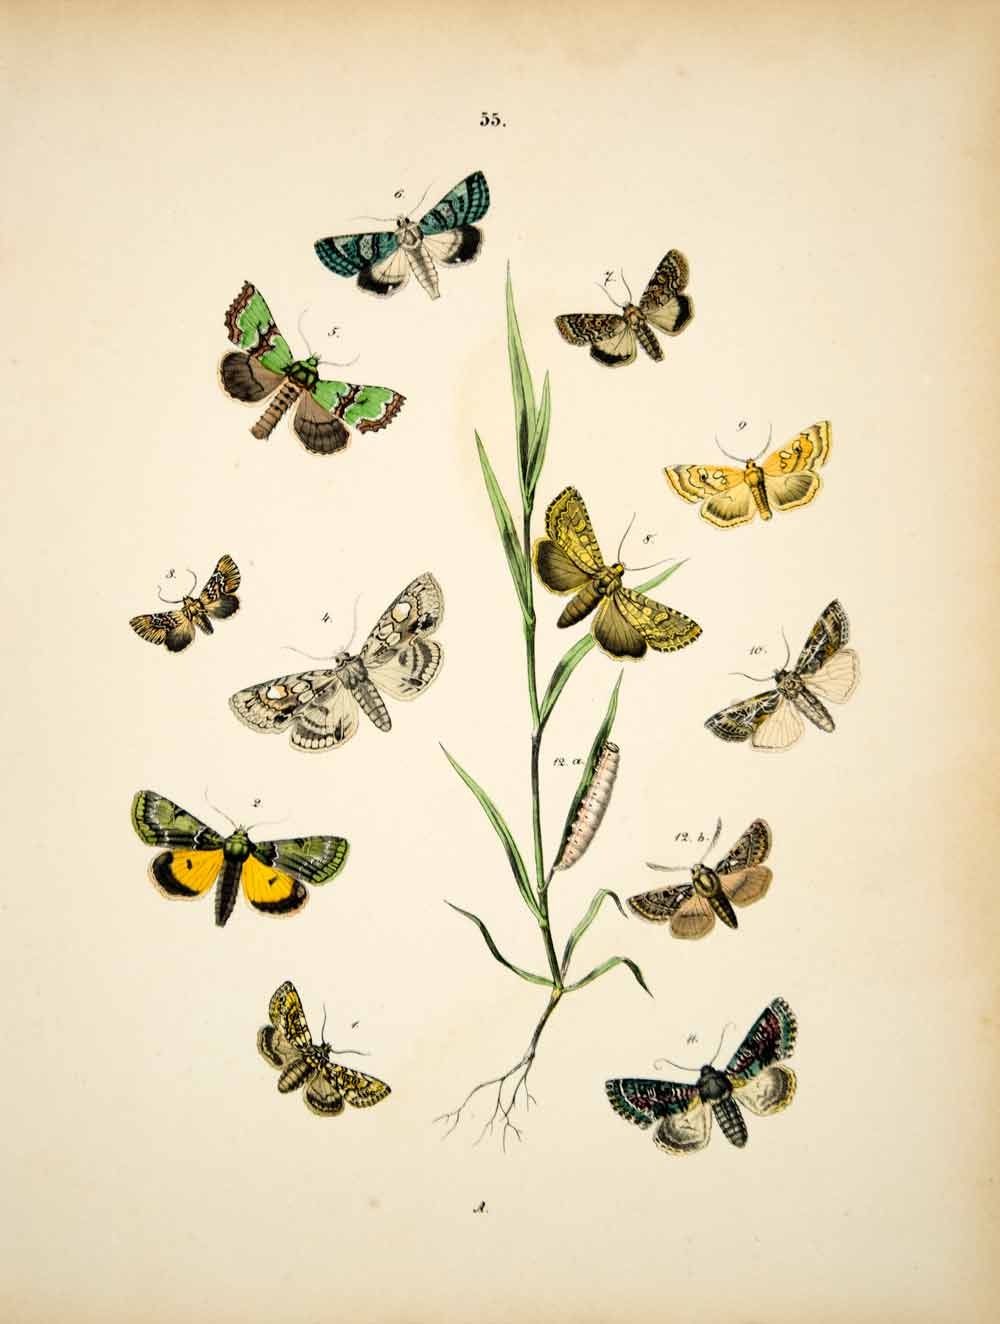 1882 Hand-Colored Lithograph WF Kirby Art Tawny Shears Moth Insect Bugs EBM1